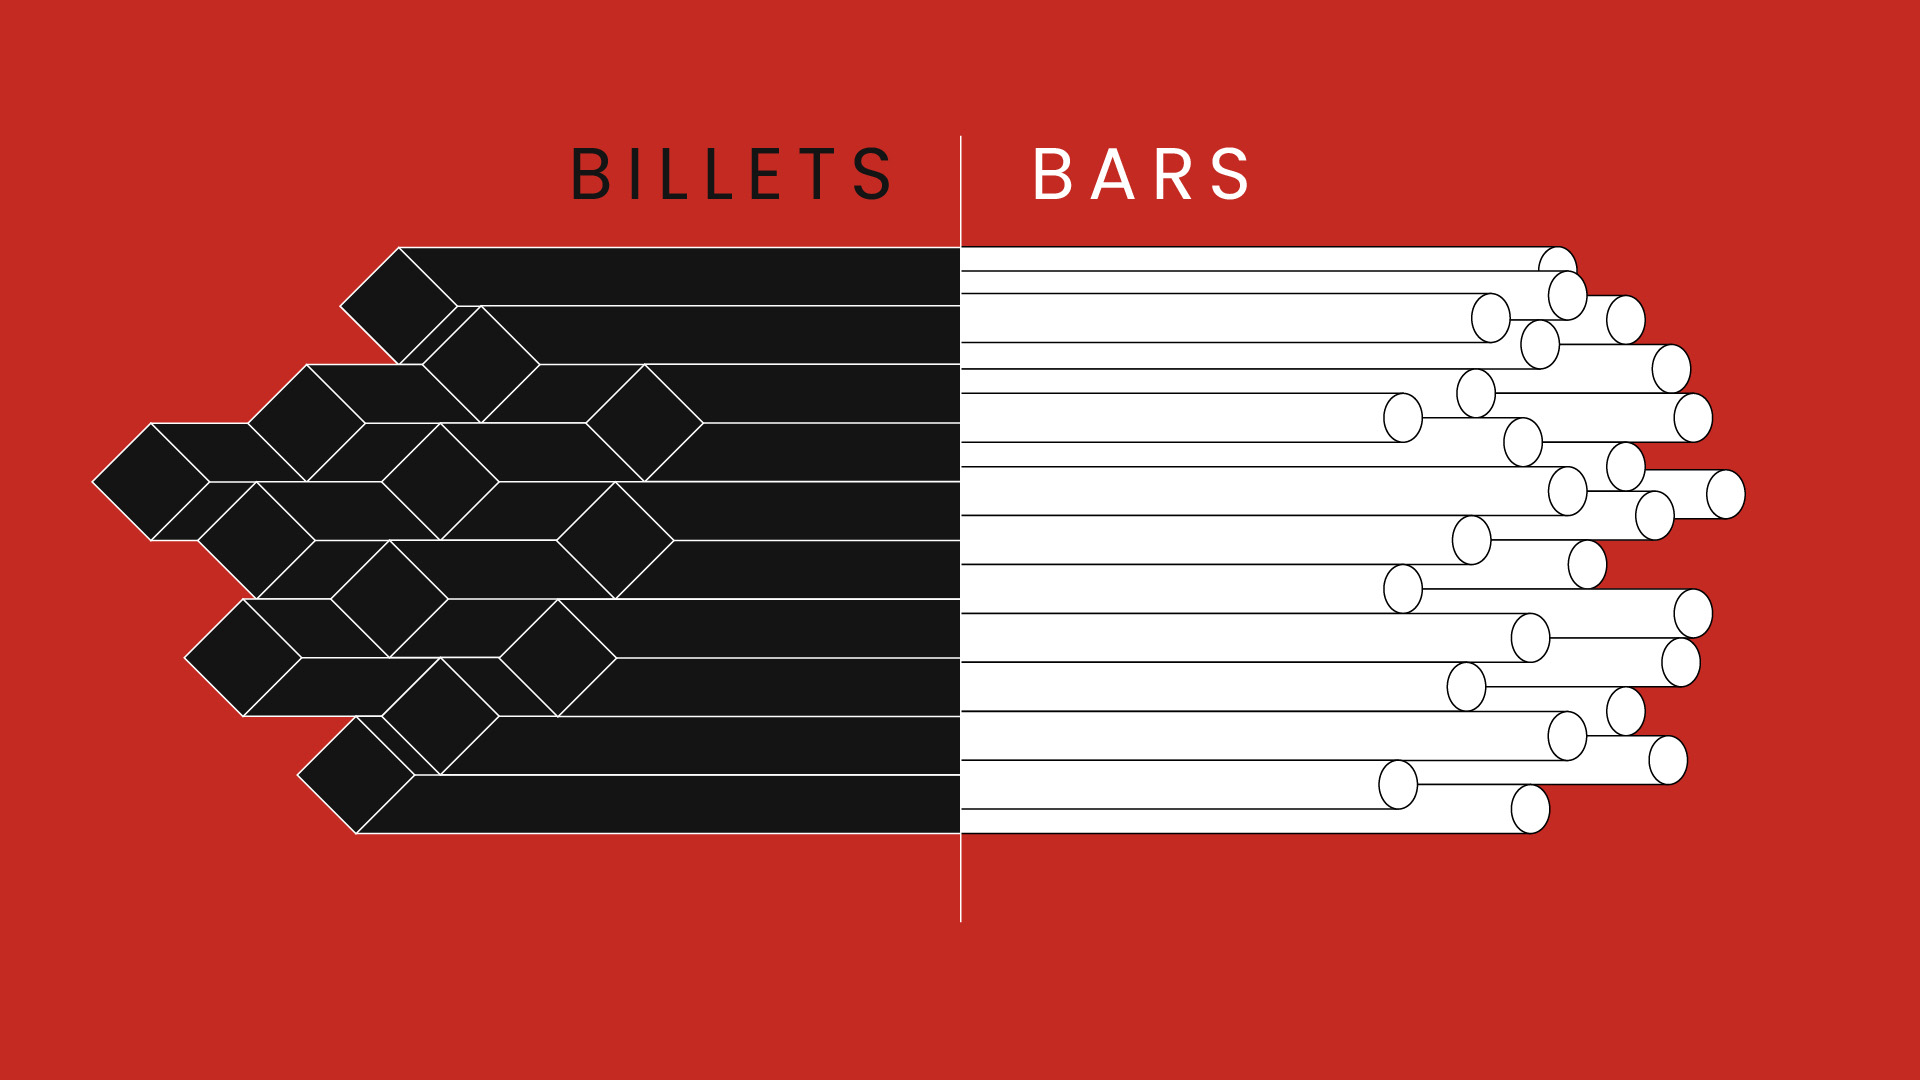 Stainless Steel Billets and Stainless Steel Bars: Key Differences You Need to Know